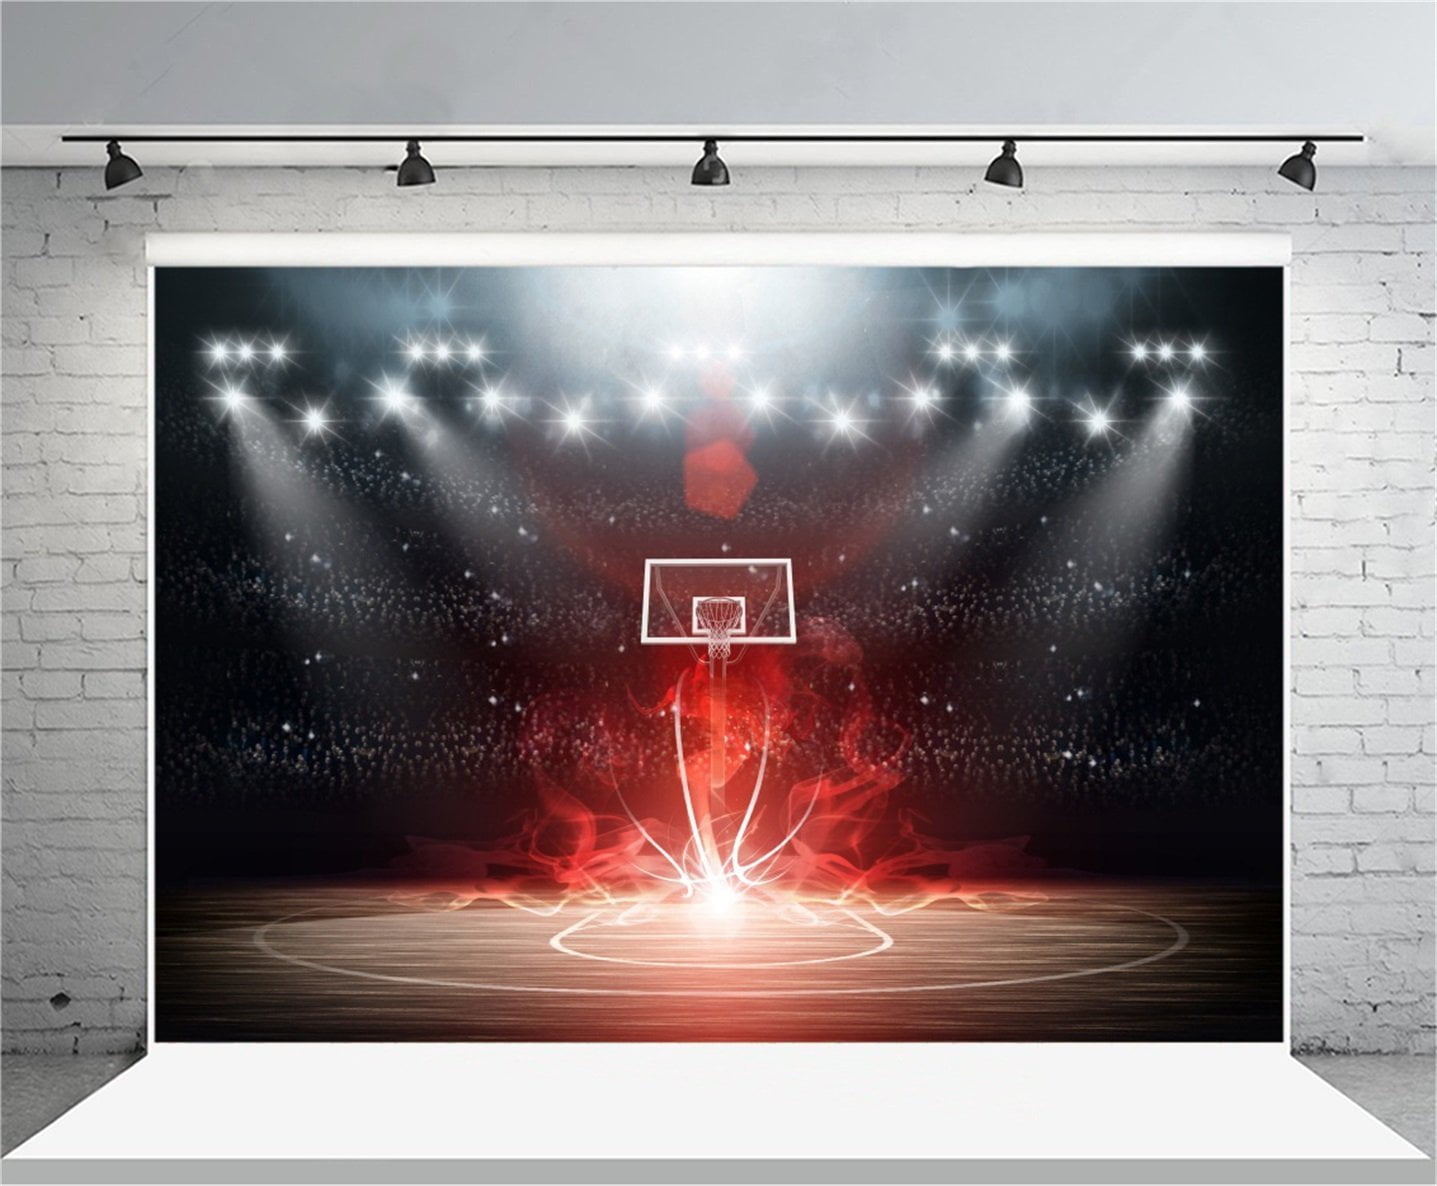 Indoor Basketball Court Photography Backdrop 7x5ft Vinyl for Children Boys Space Jam Themed Birthday Party Supplies Baby Shower Sport Stadium Photo Background Decorations Banner Photo Booths